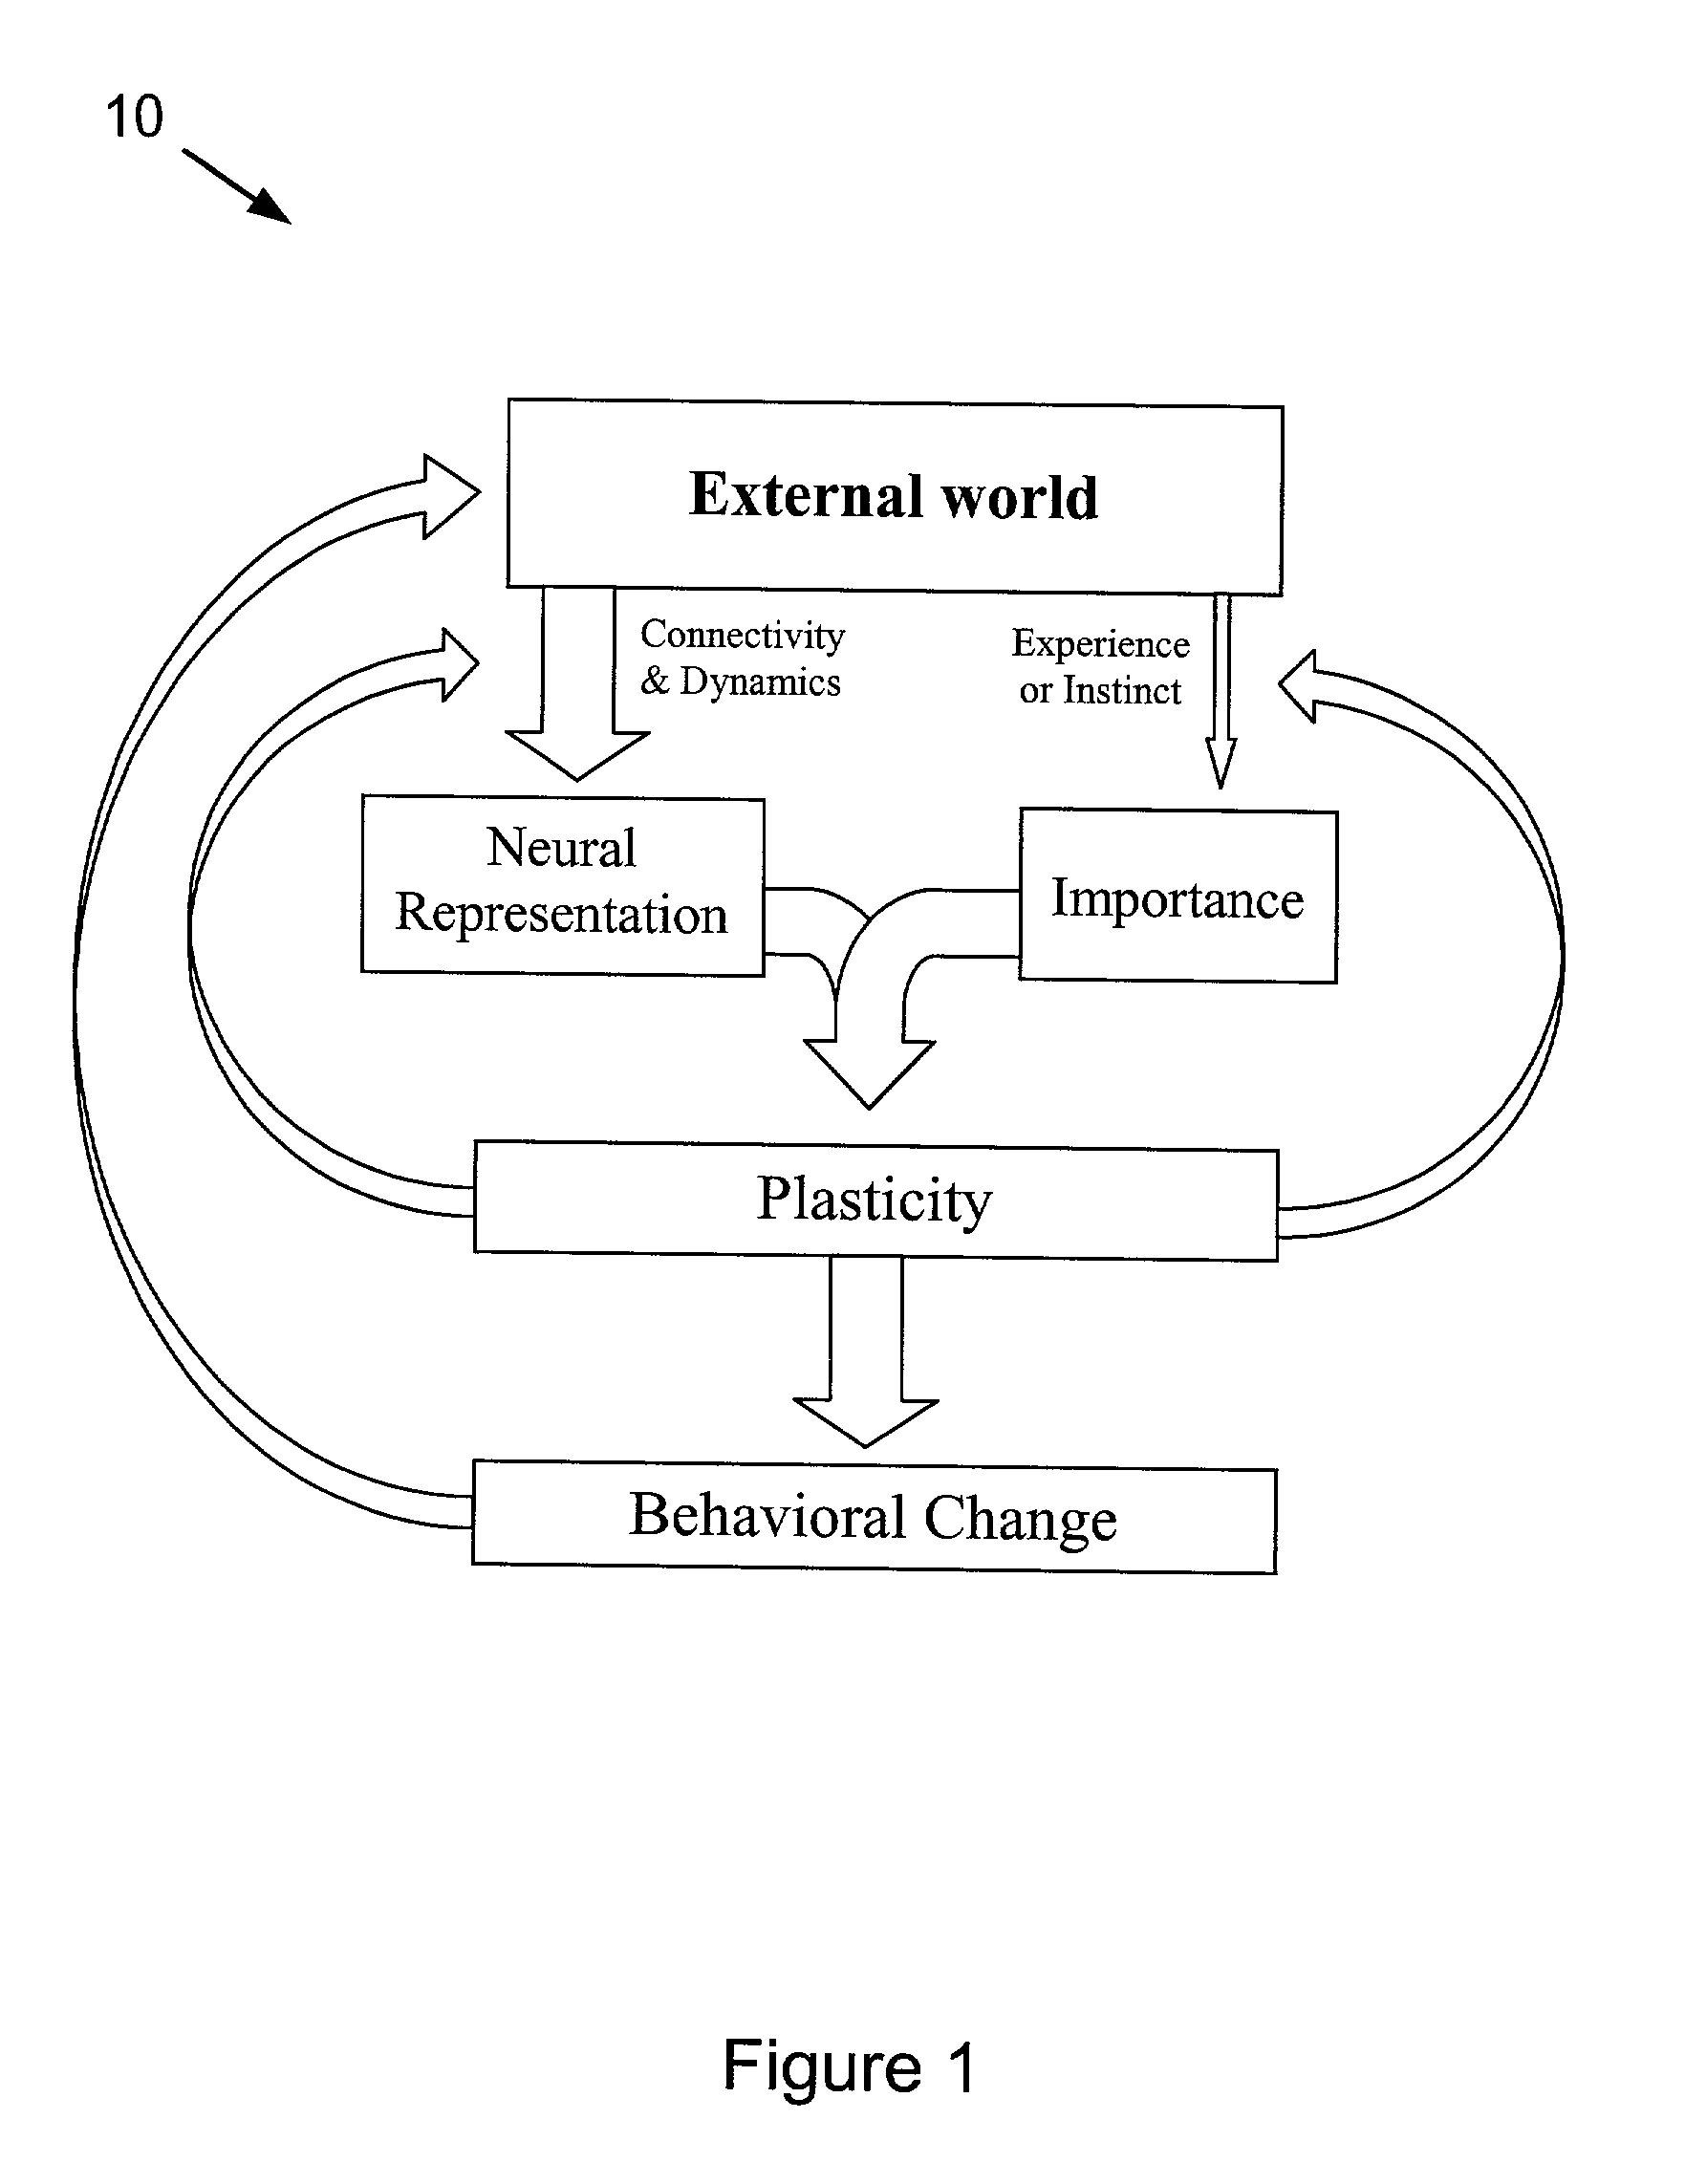 Computer-implemented methods and apparatus for alleviating abnormal behaviors